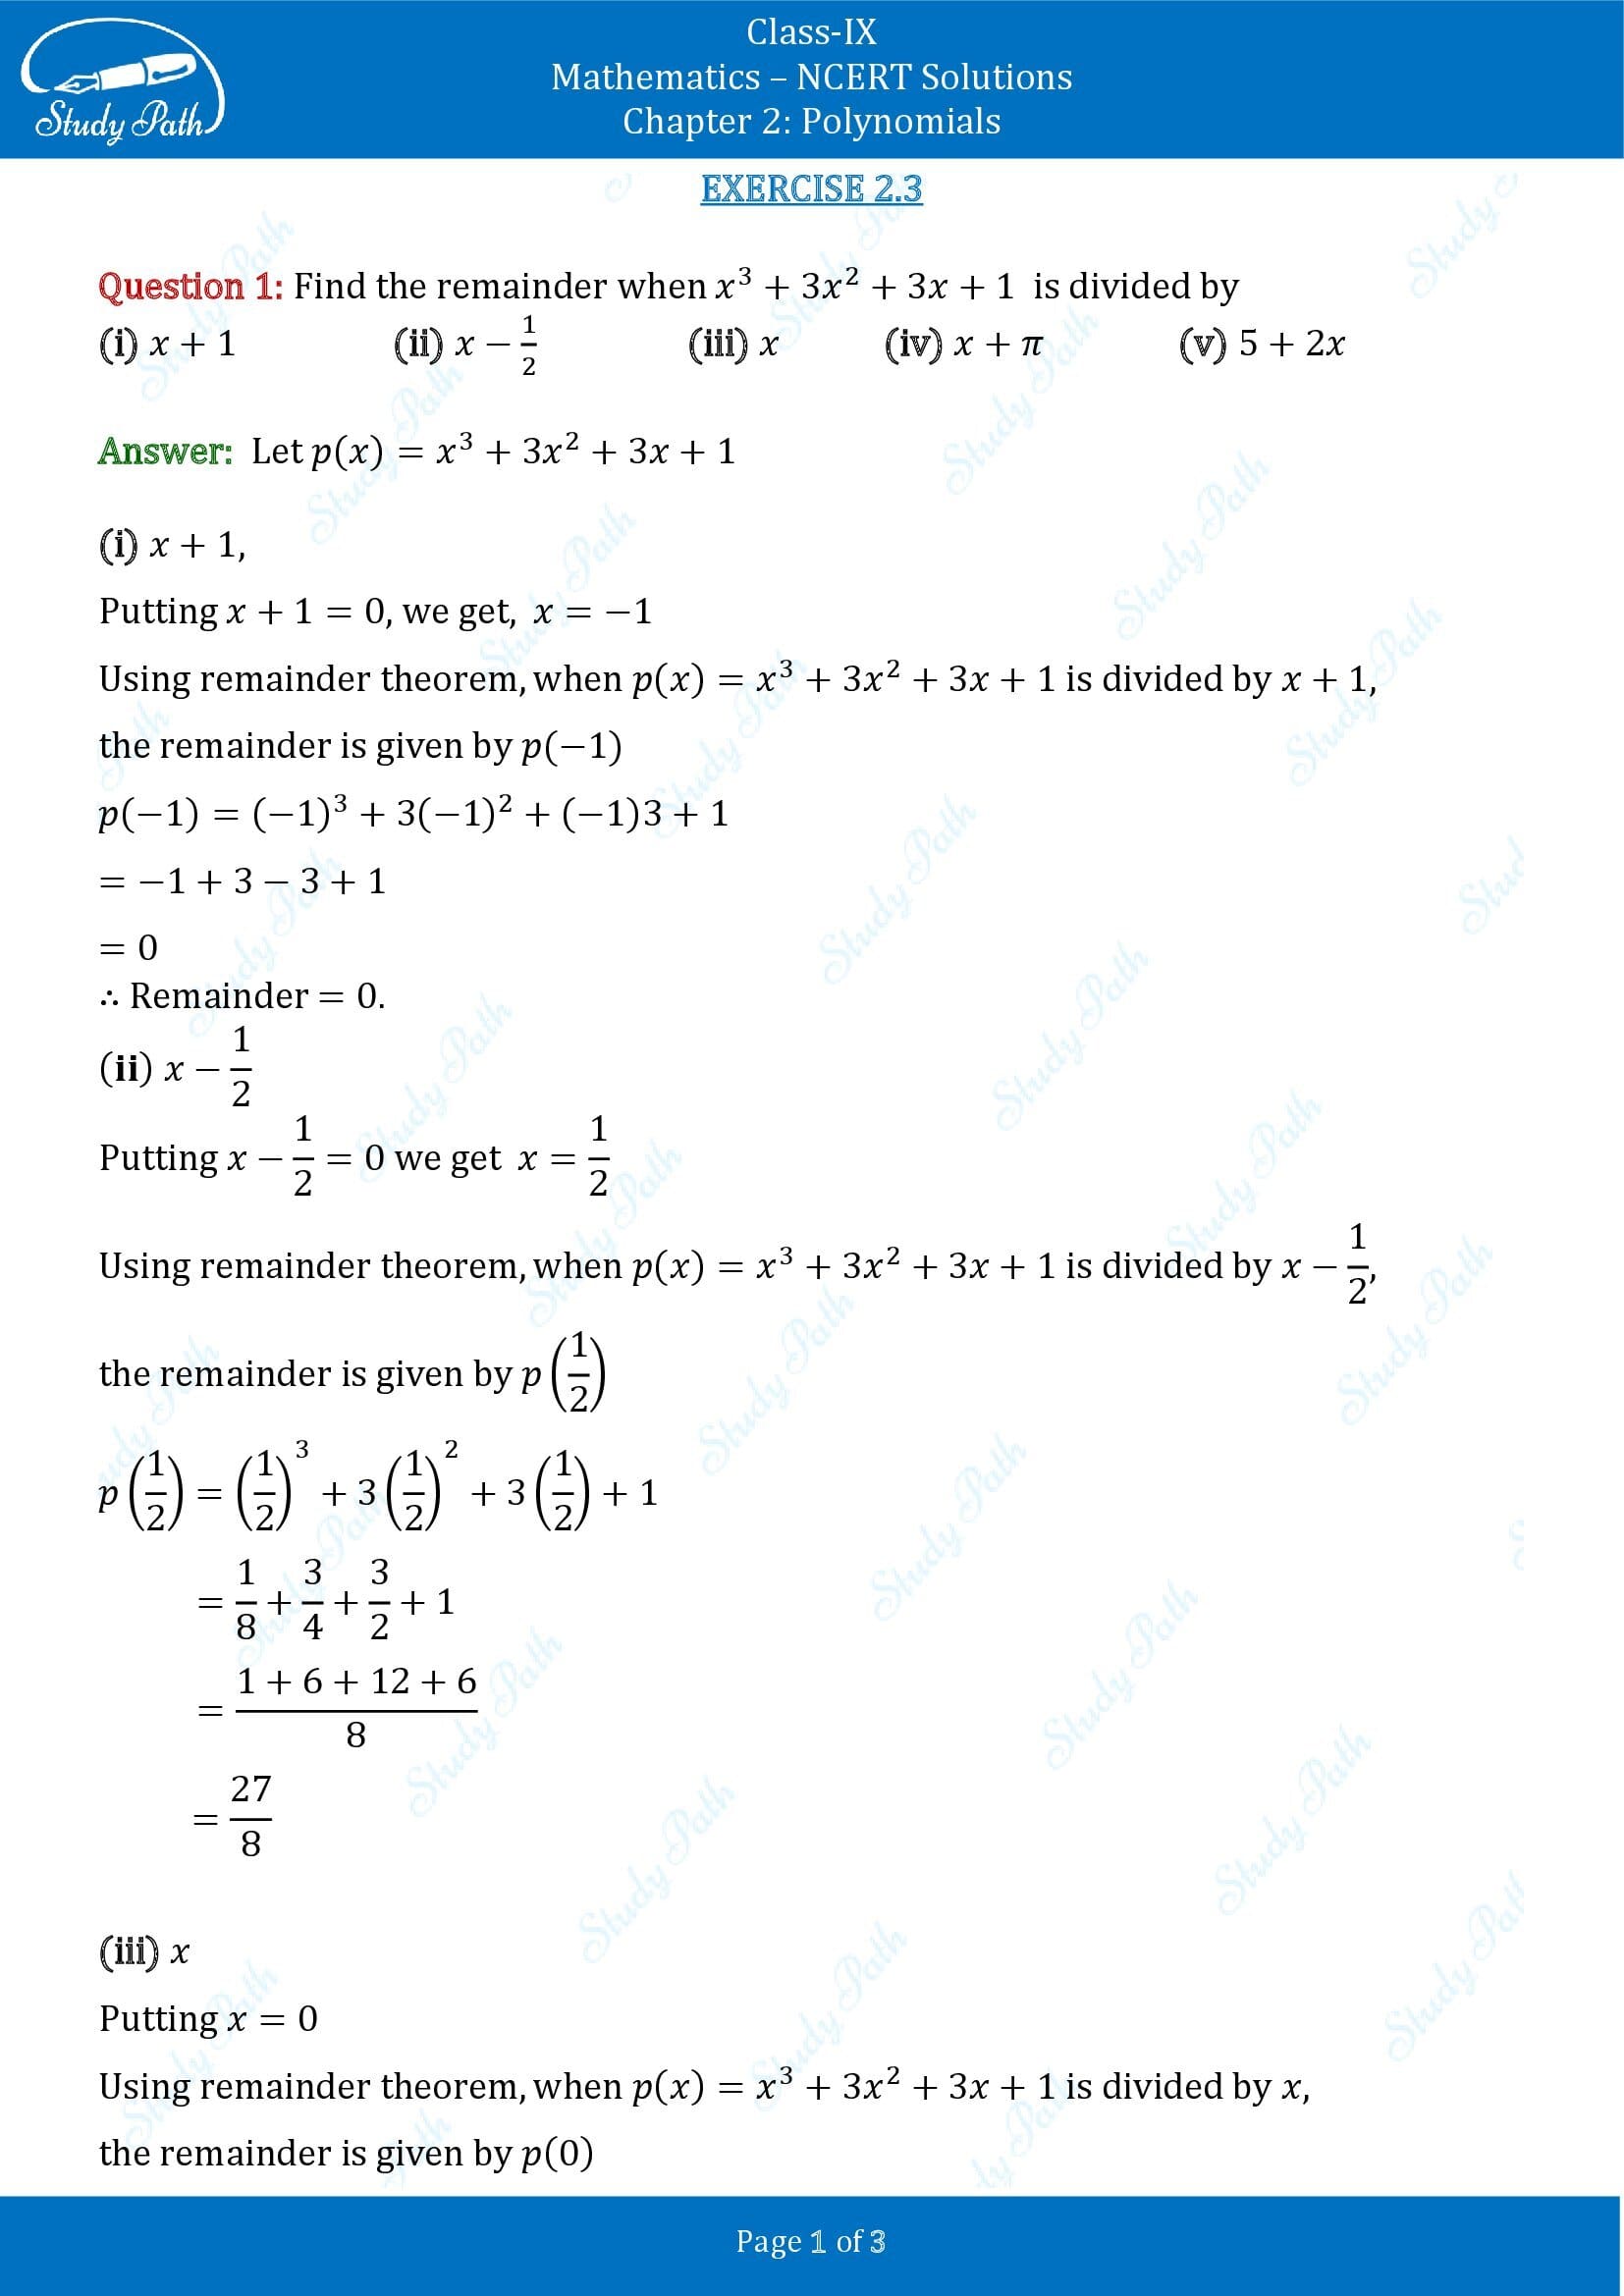 NCERT Solutions for Class 9 Maths Chapter 2 Polynomials Exercise 2.3 00001